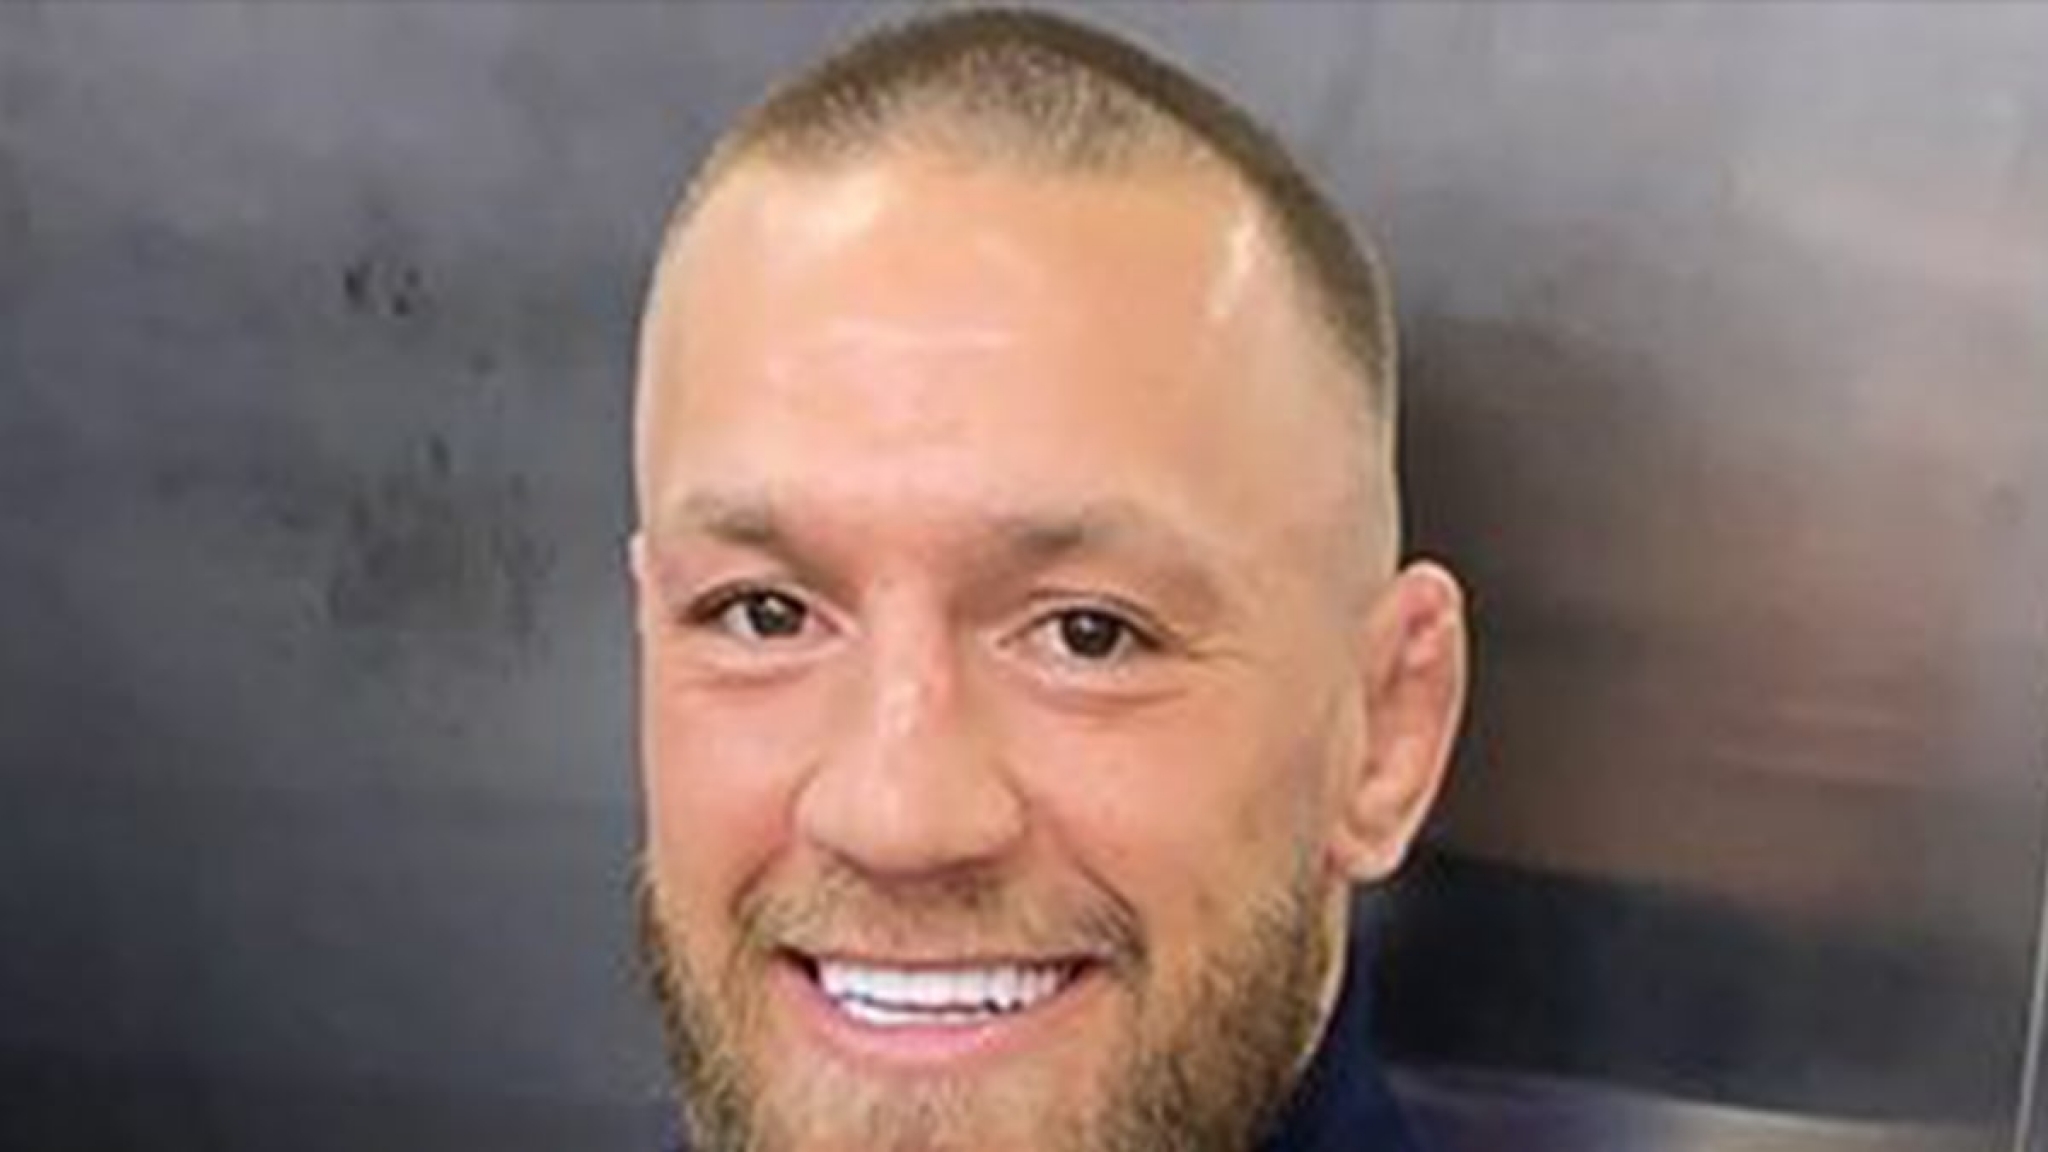 Conor McGregor Donates $500k To Louisiana Youth After Charity Spat With Poirier